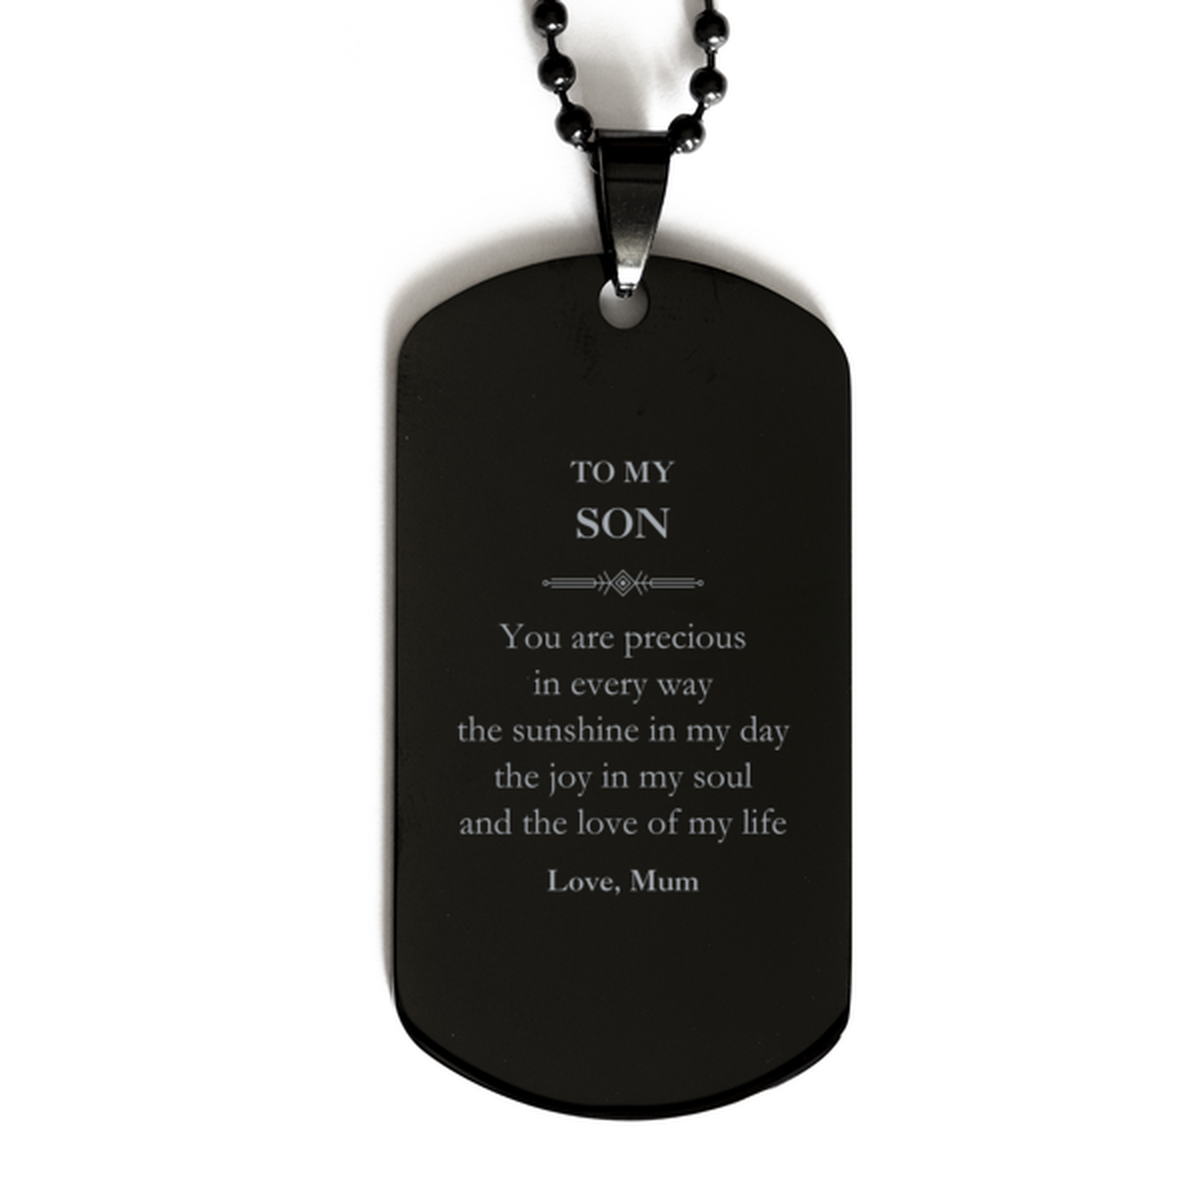 Graduation Gifts for Son Black Dog Tag Present from Mum, Christmas Son Birthday Gifts Son You are precious in every way the sunshine in my day. Love, Mum